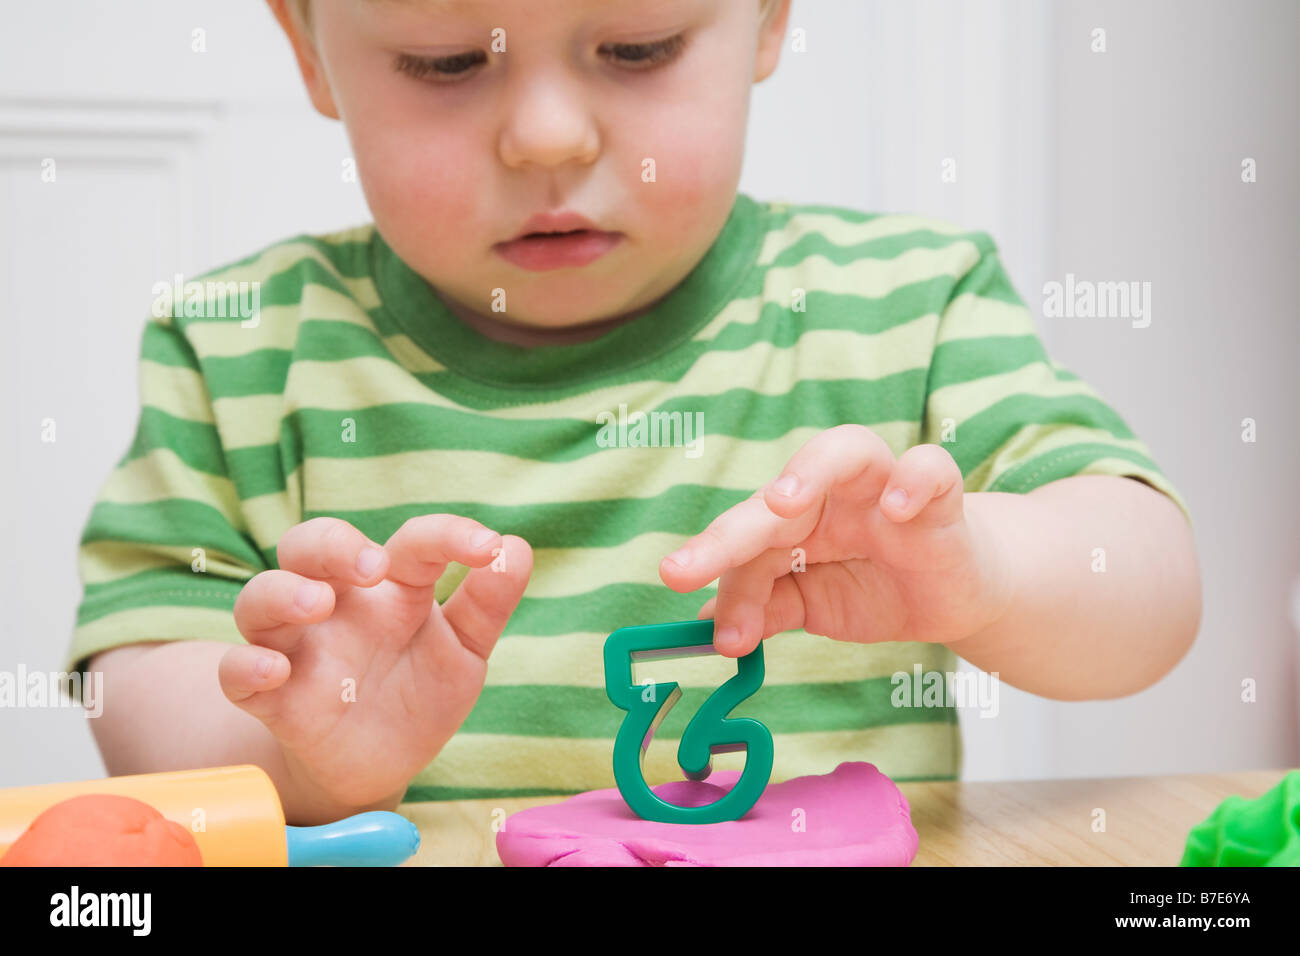 Little boy with modelling clay Stock Photo